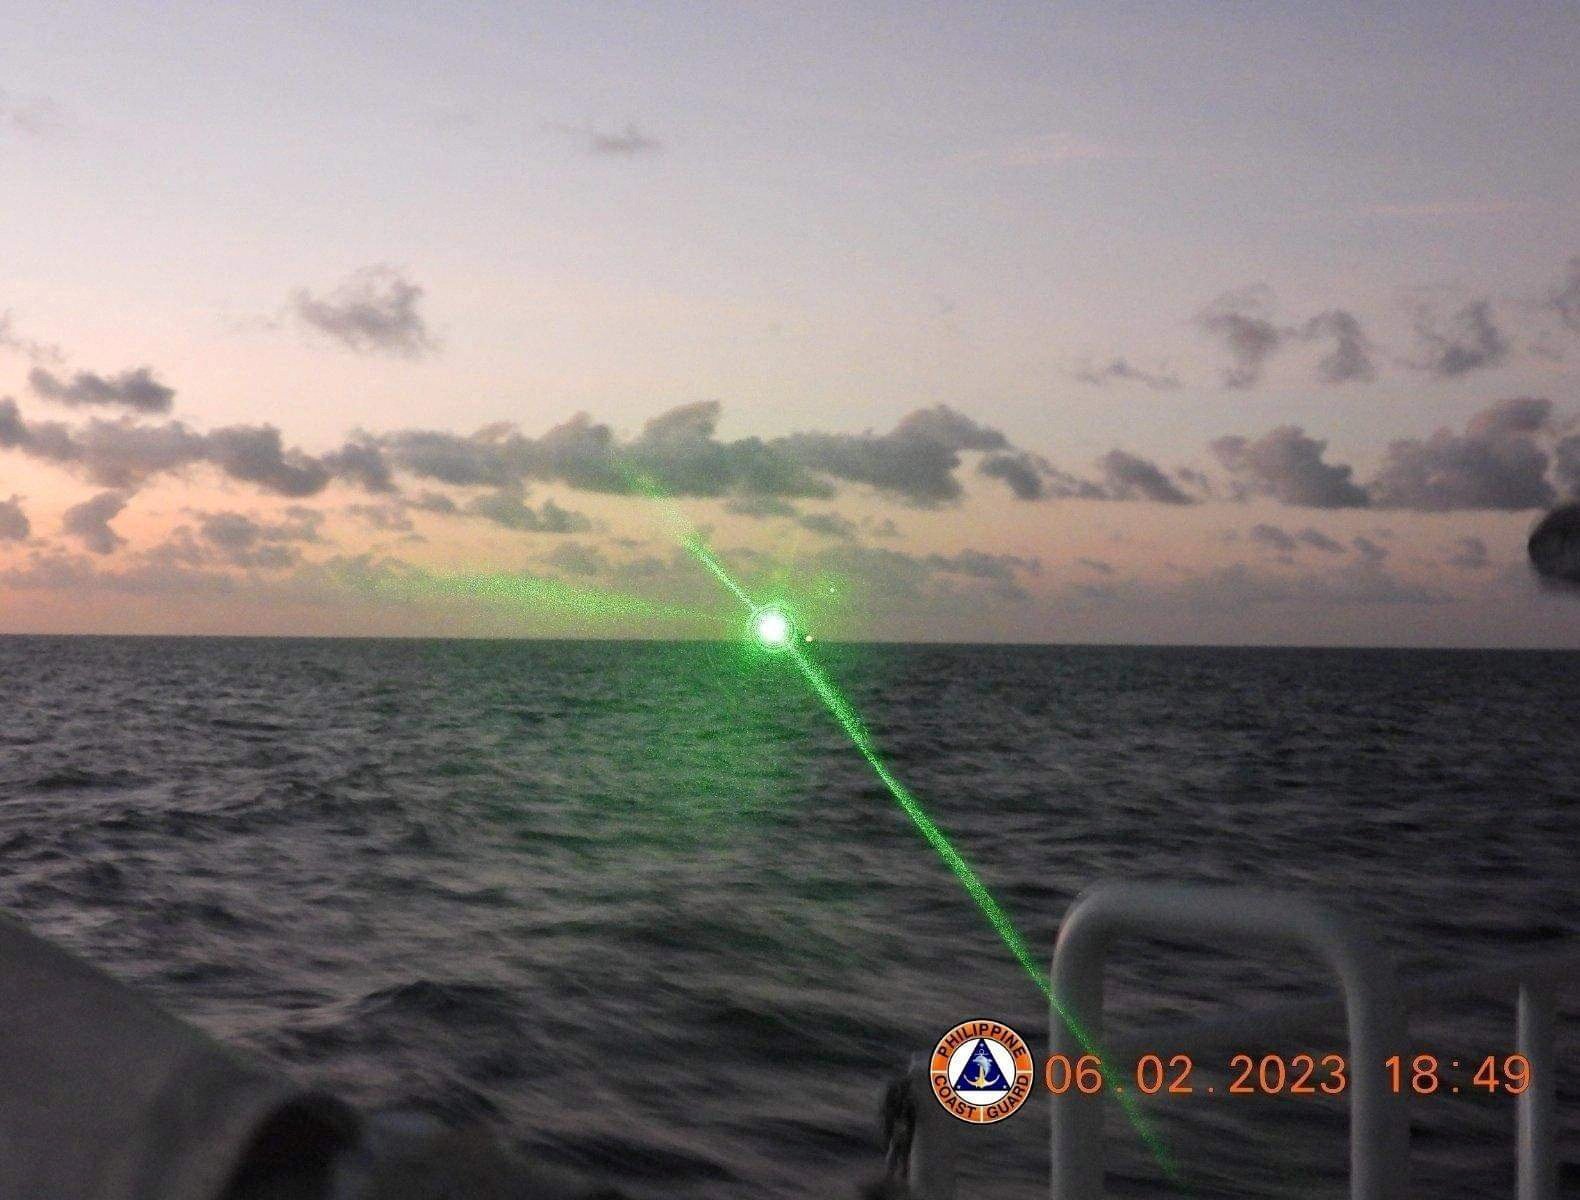 Philippines urges China to prevent any “provocative act” after complaint over laser